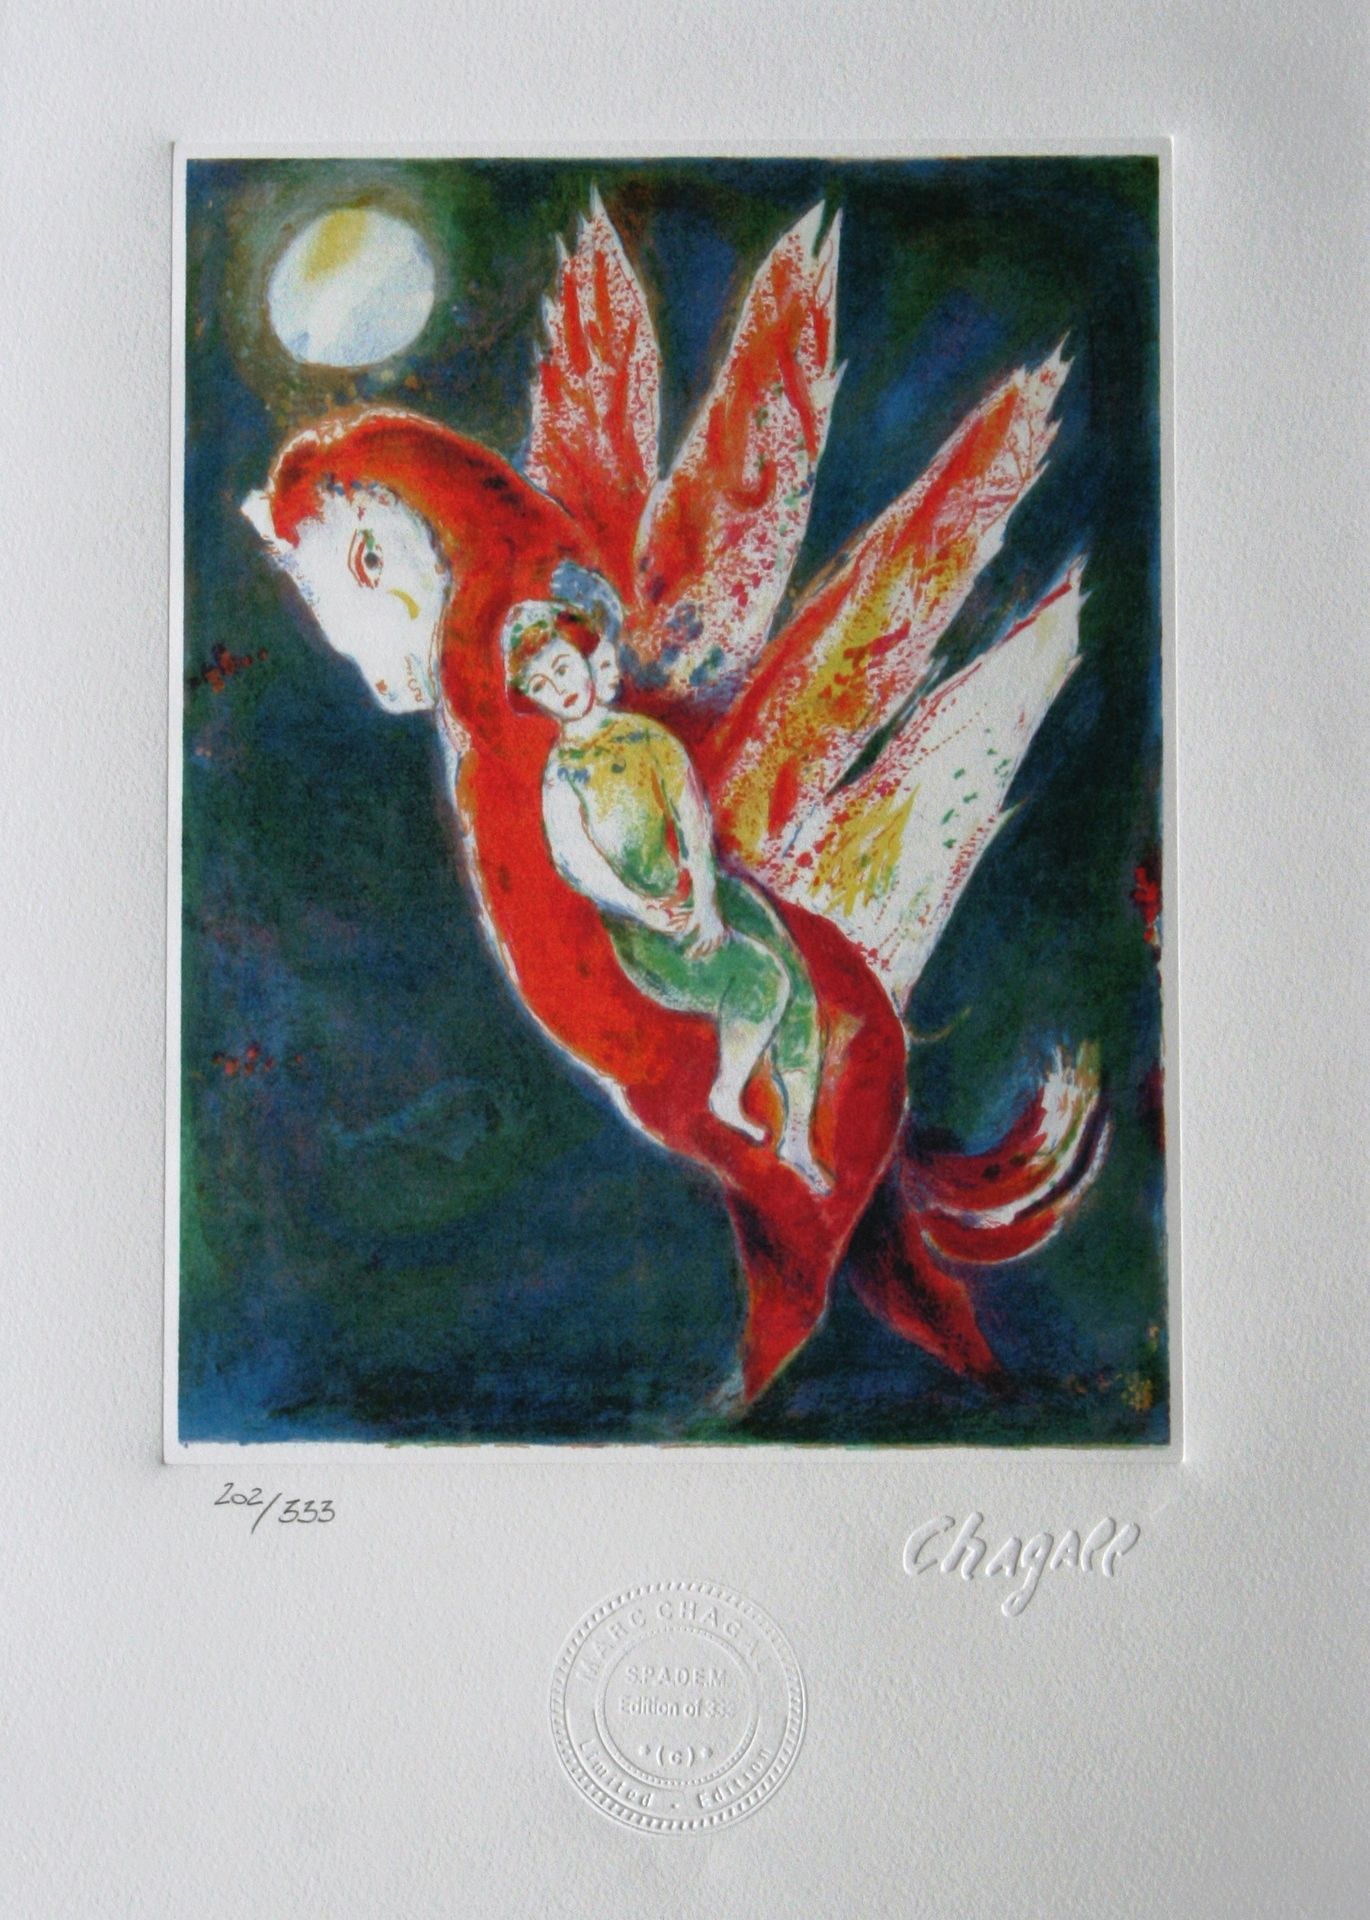 Marc Chagall Marc Chagall (1887-1985)

Mille et une nuits, 1985

Lithographie

N&hellip;